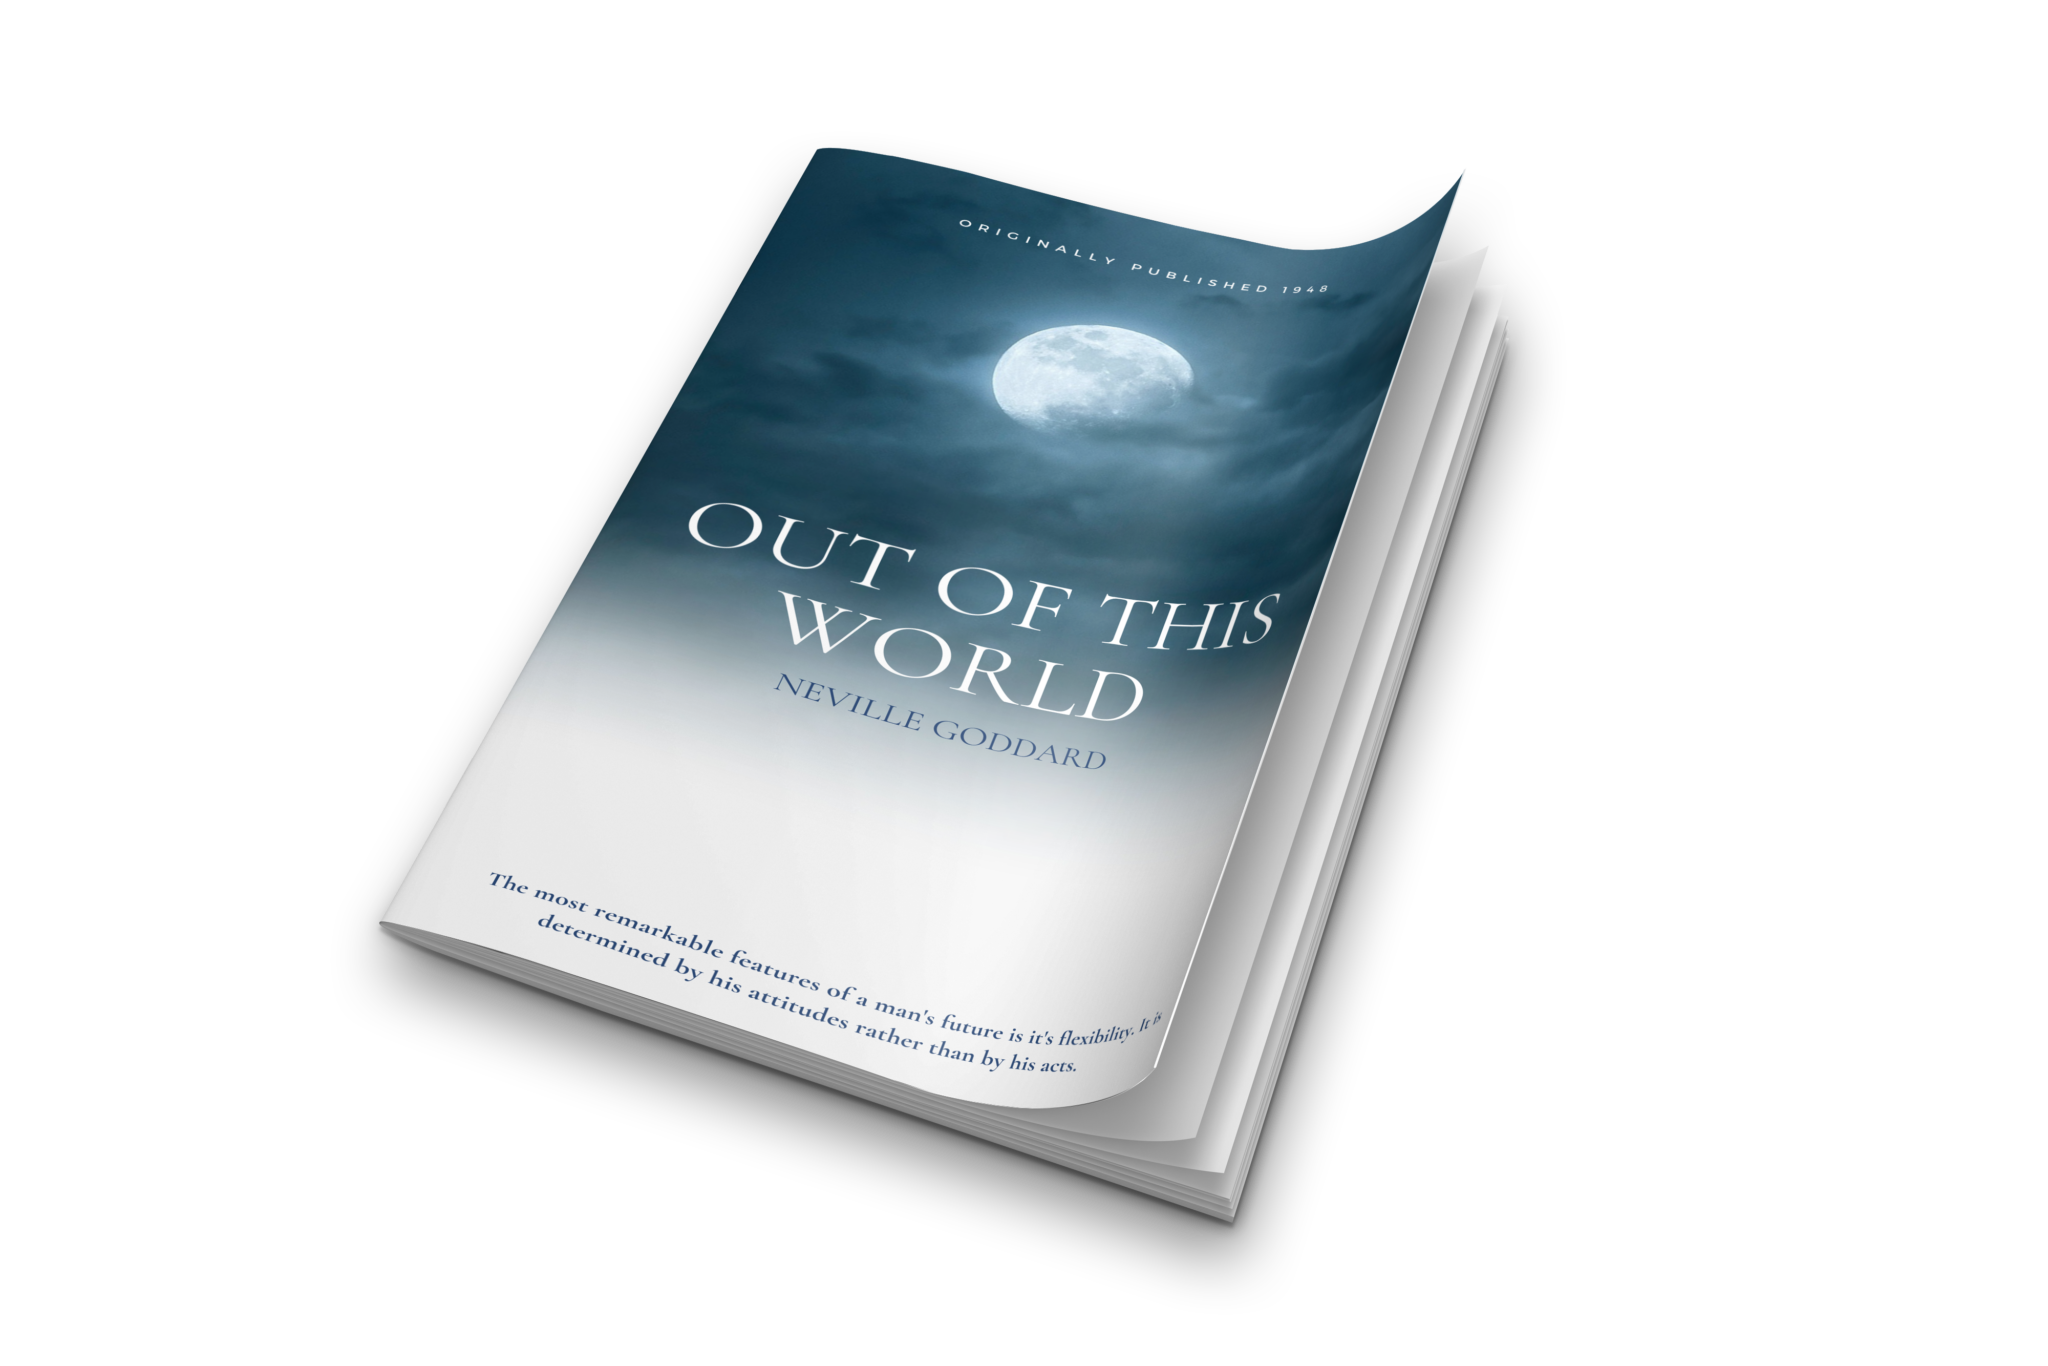 out of this world by neville goddard